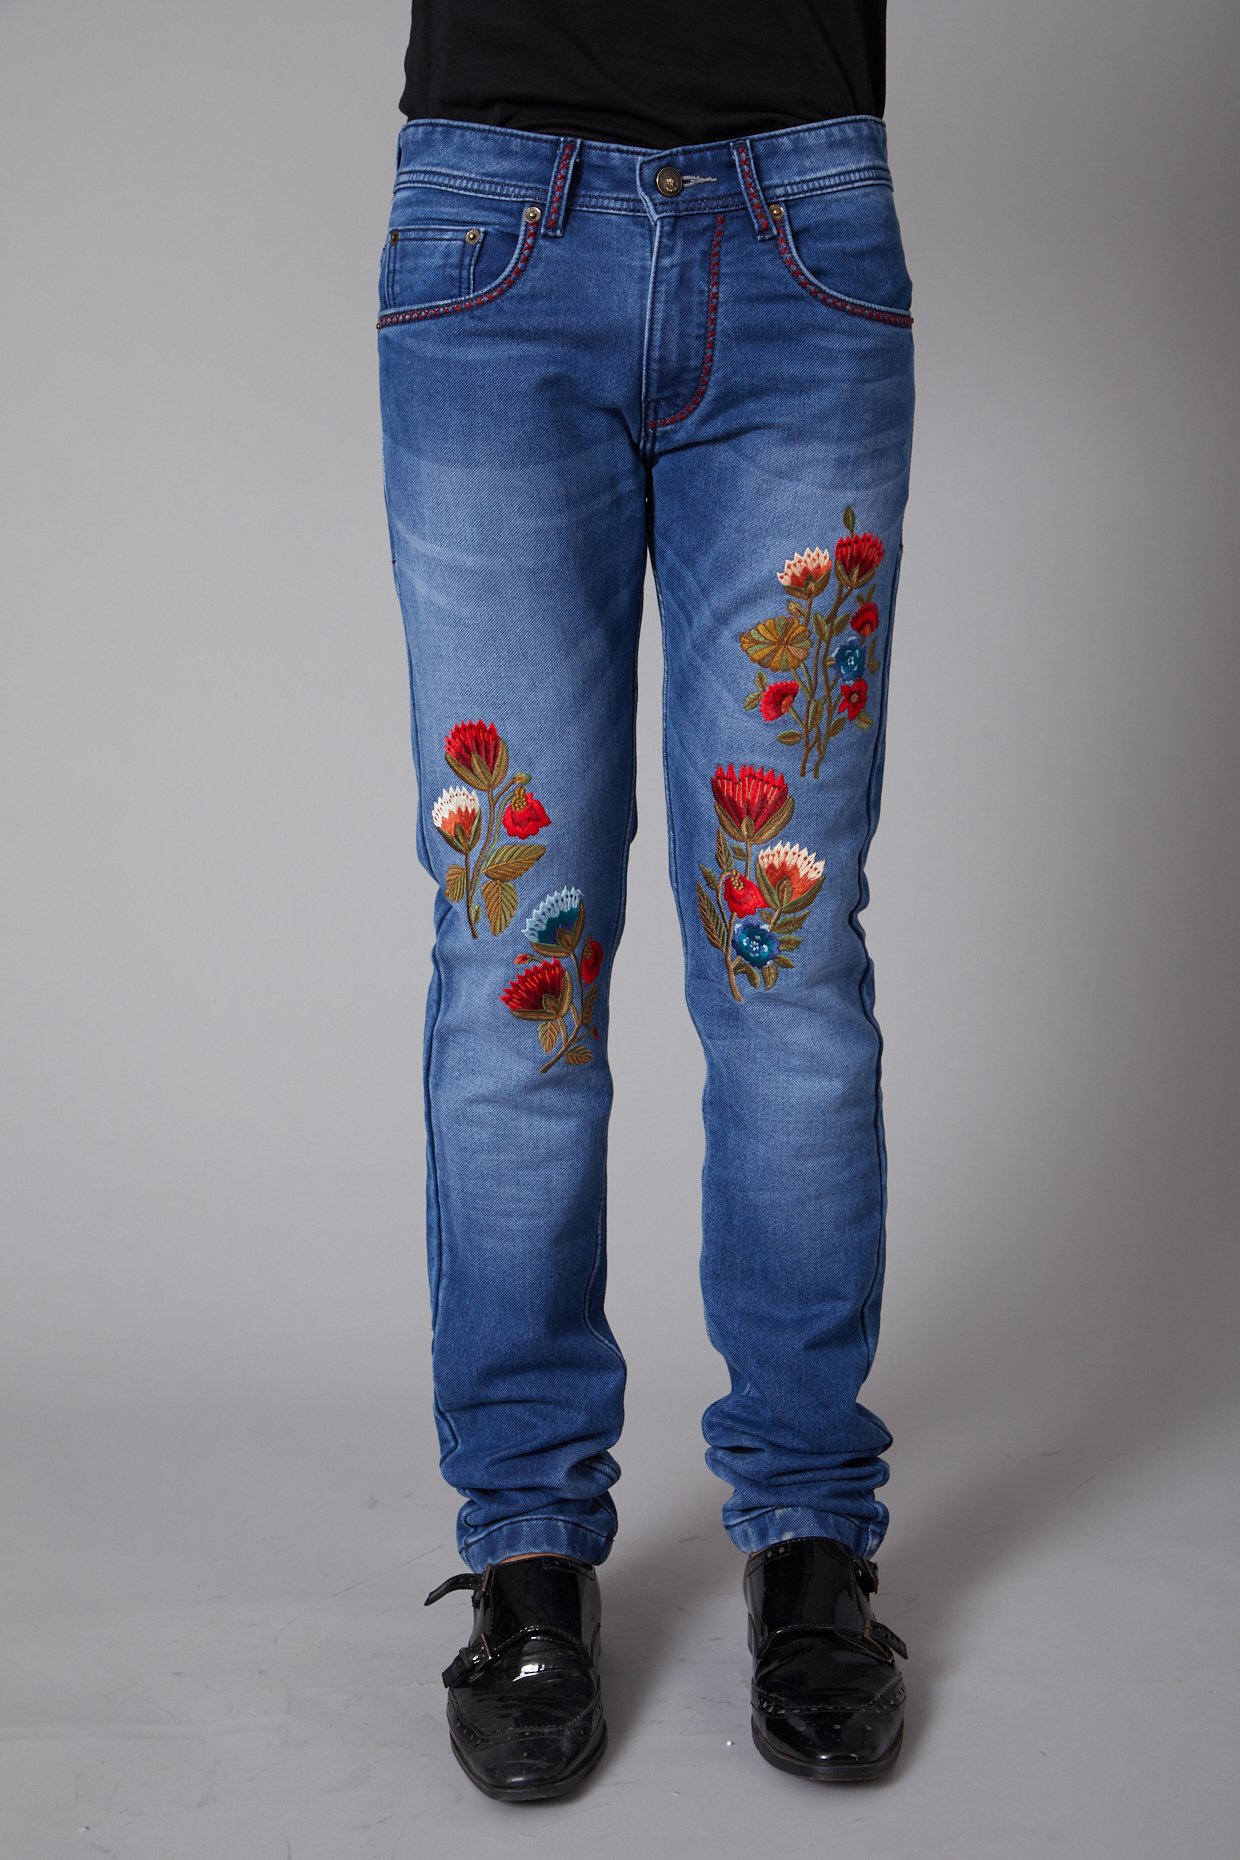 Harajuku Floral Denim Pants For Women Elastic Waist Button Baggy Baggy  Trousers Women With Mid Lantern Design Perfect For Casual Wear From  Leegarden, $21.96 | DHgate.Com